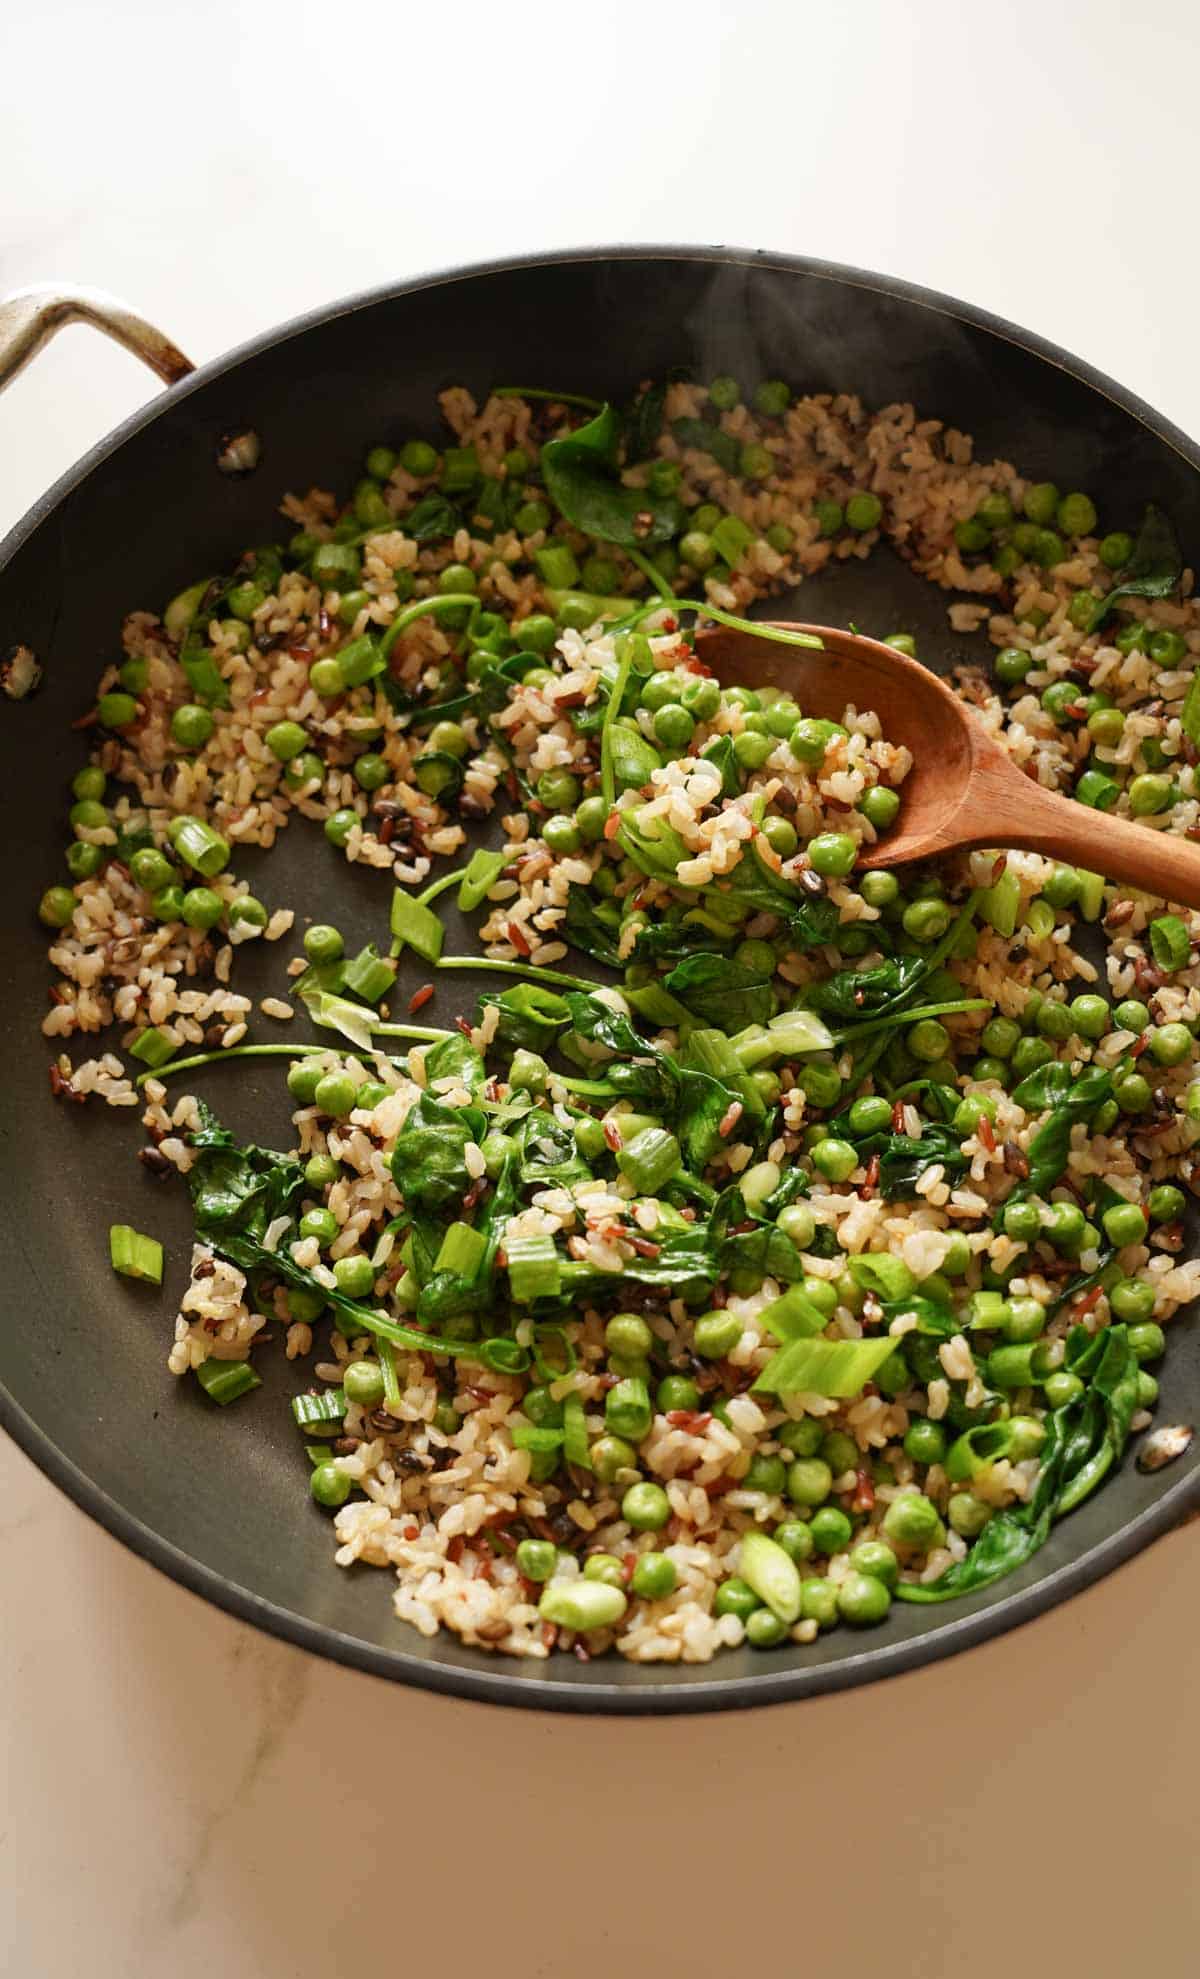 stir-fried rice blend in a pan with veggies and a wooden spoon.